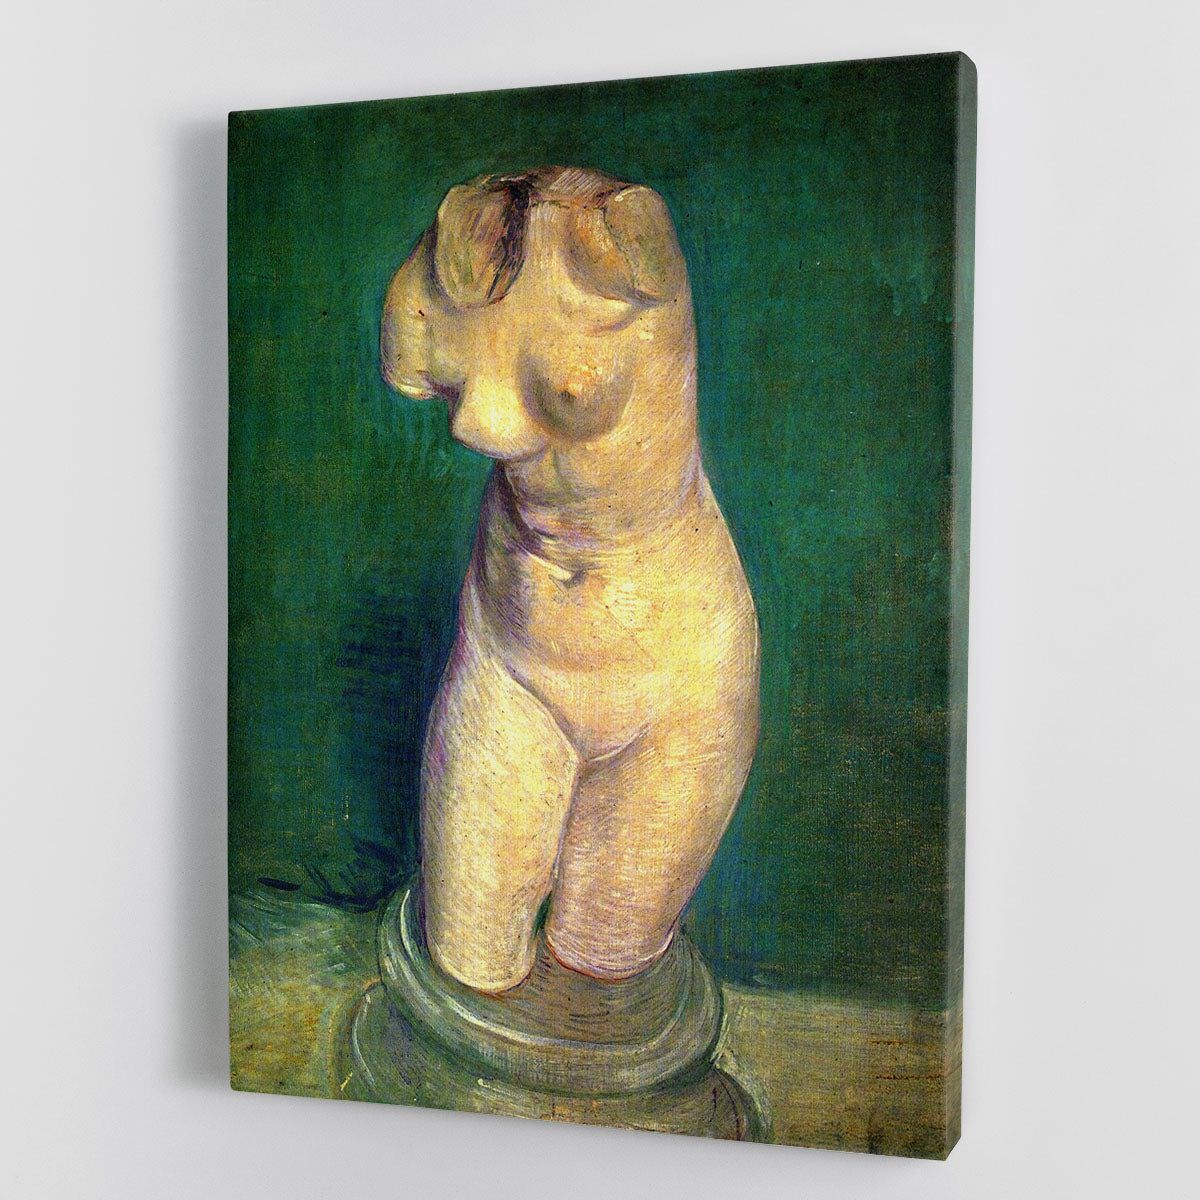 Plaster Statuette of a Female Torso by Van Gogh Canvas Print or Poster - Canvas Art Rocks - 1